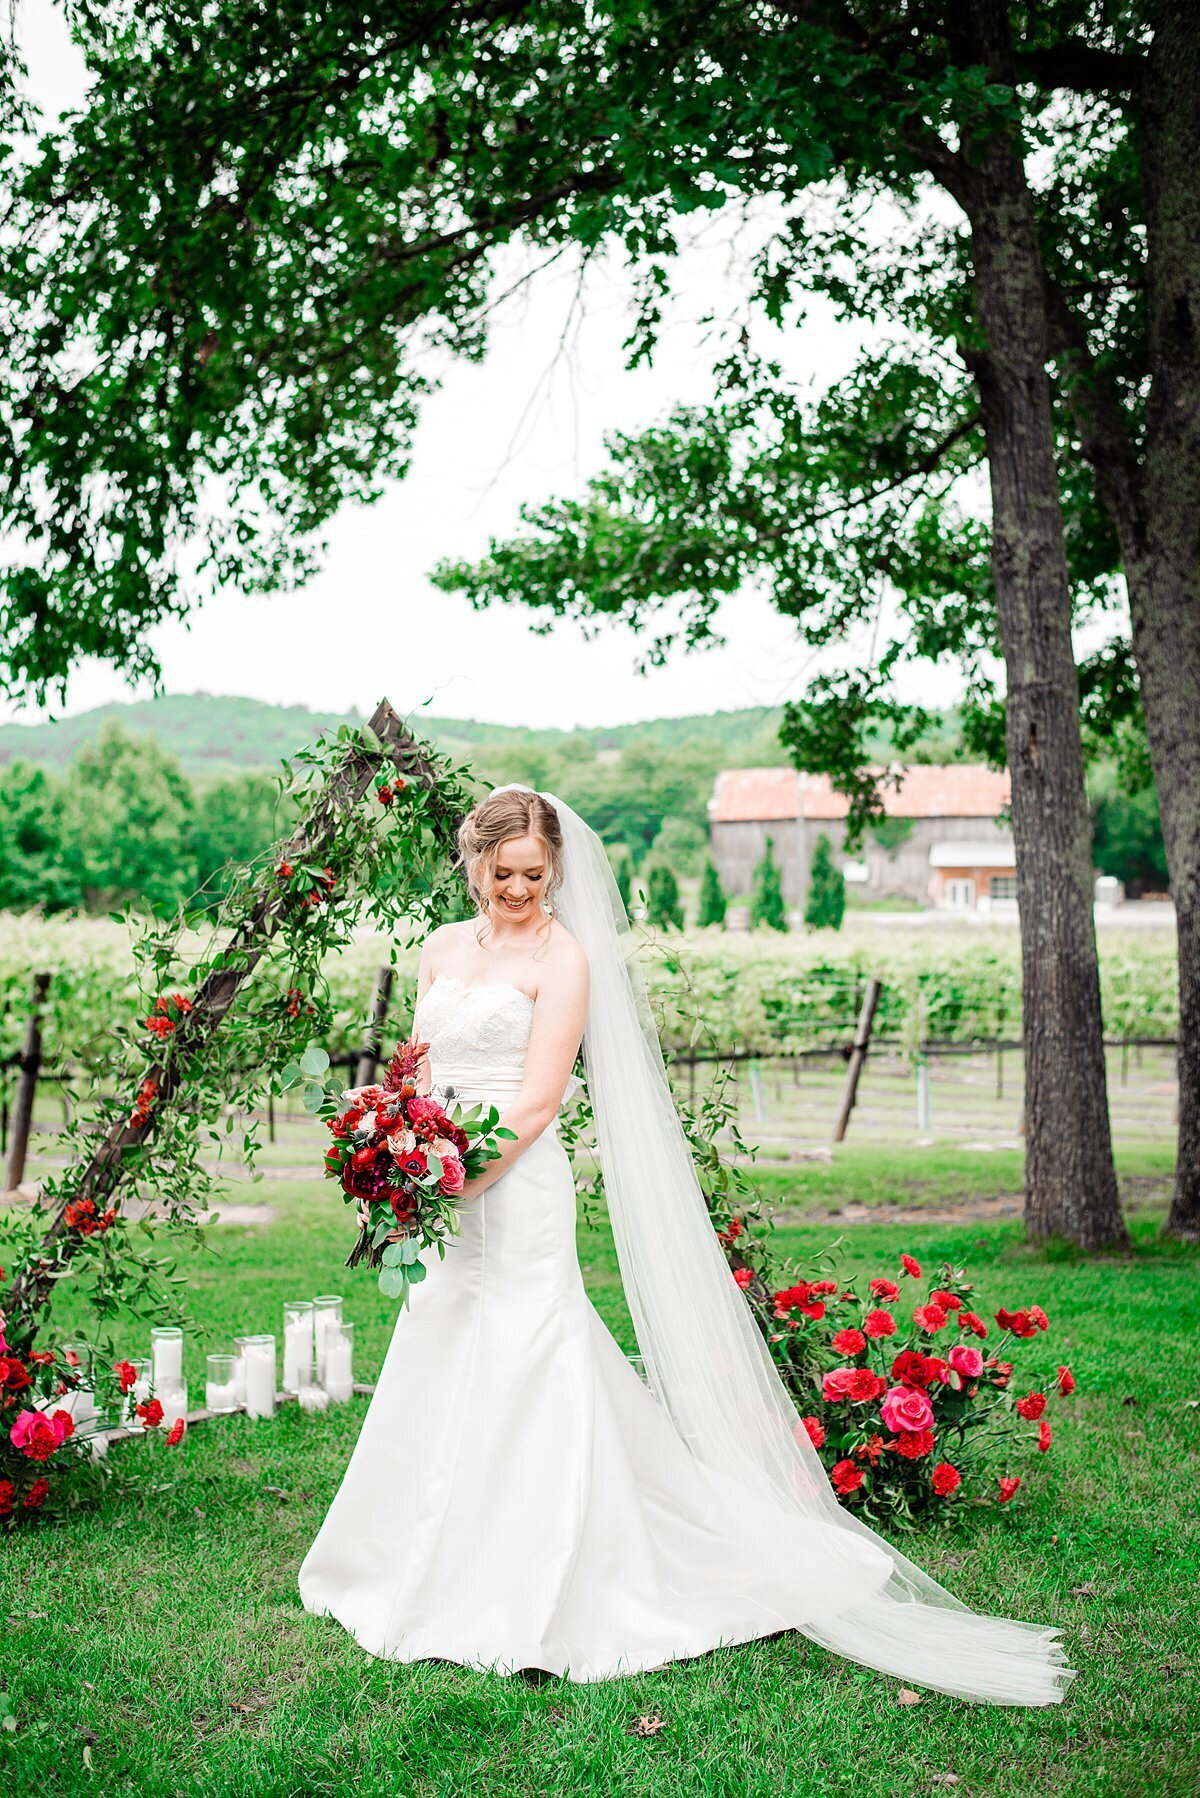 The bride, wearing a white silk wedding gown with a strapless lace bodice and sweetheart neckline and long veil holds a large red and blush bouquet of roses, red anthurium, red ranunculus, red anemones, blush and red protea, blue thistle, hypericum berries, red cascading dianthus and assorted greenery as she stands in front of a  rustic wooden triangular ceremony arbor covered in smilax vines, red roses, red carnations and decorated with white pillar candles in glass cylinders overlooking the vineyard vines at Arrington Vineyards.